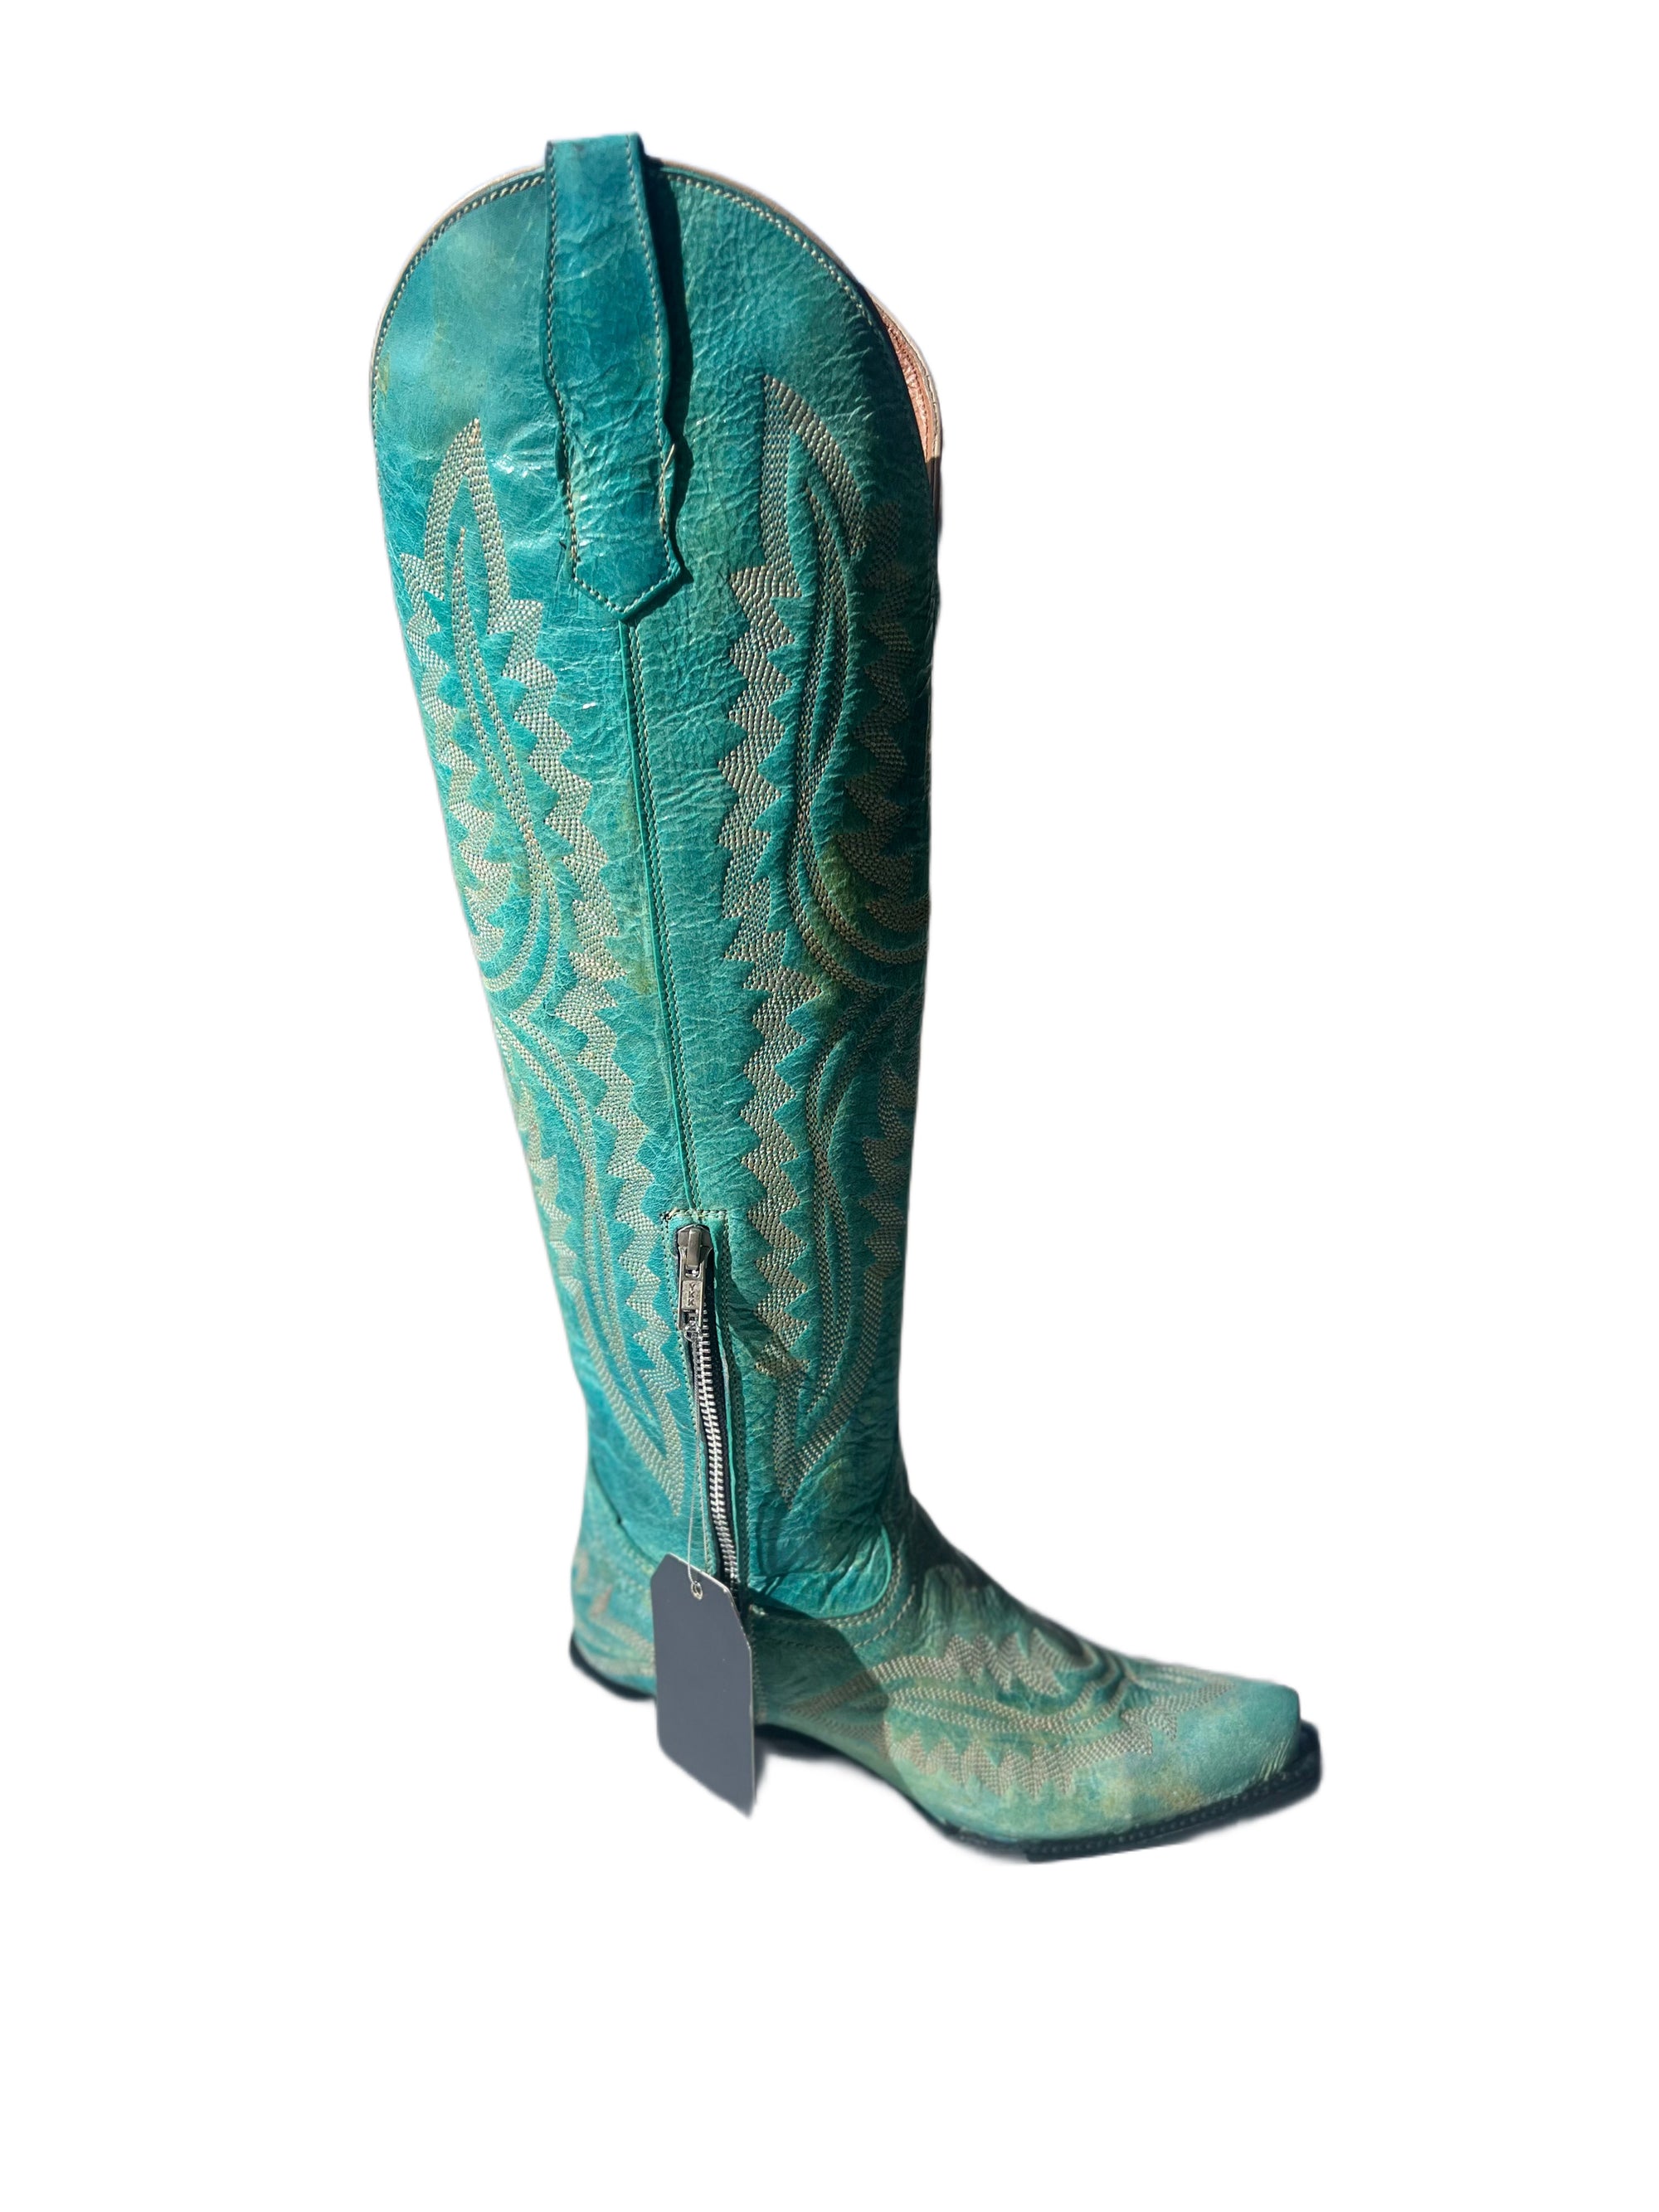 VALENTIA TURQUOISE TALL COWGIRL BOOTS